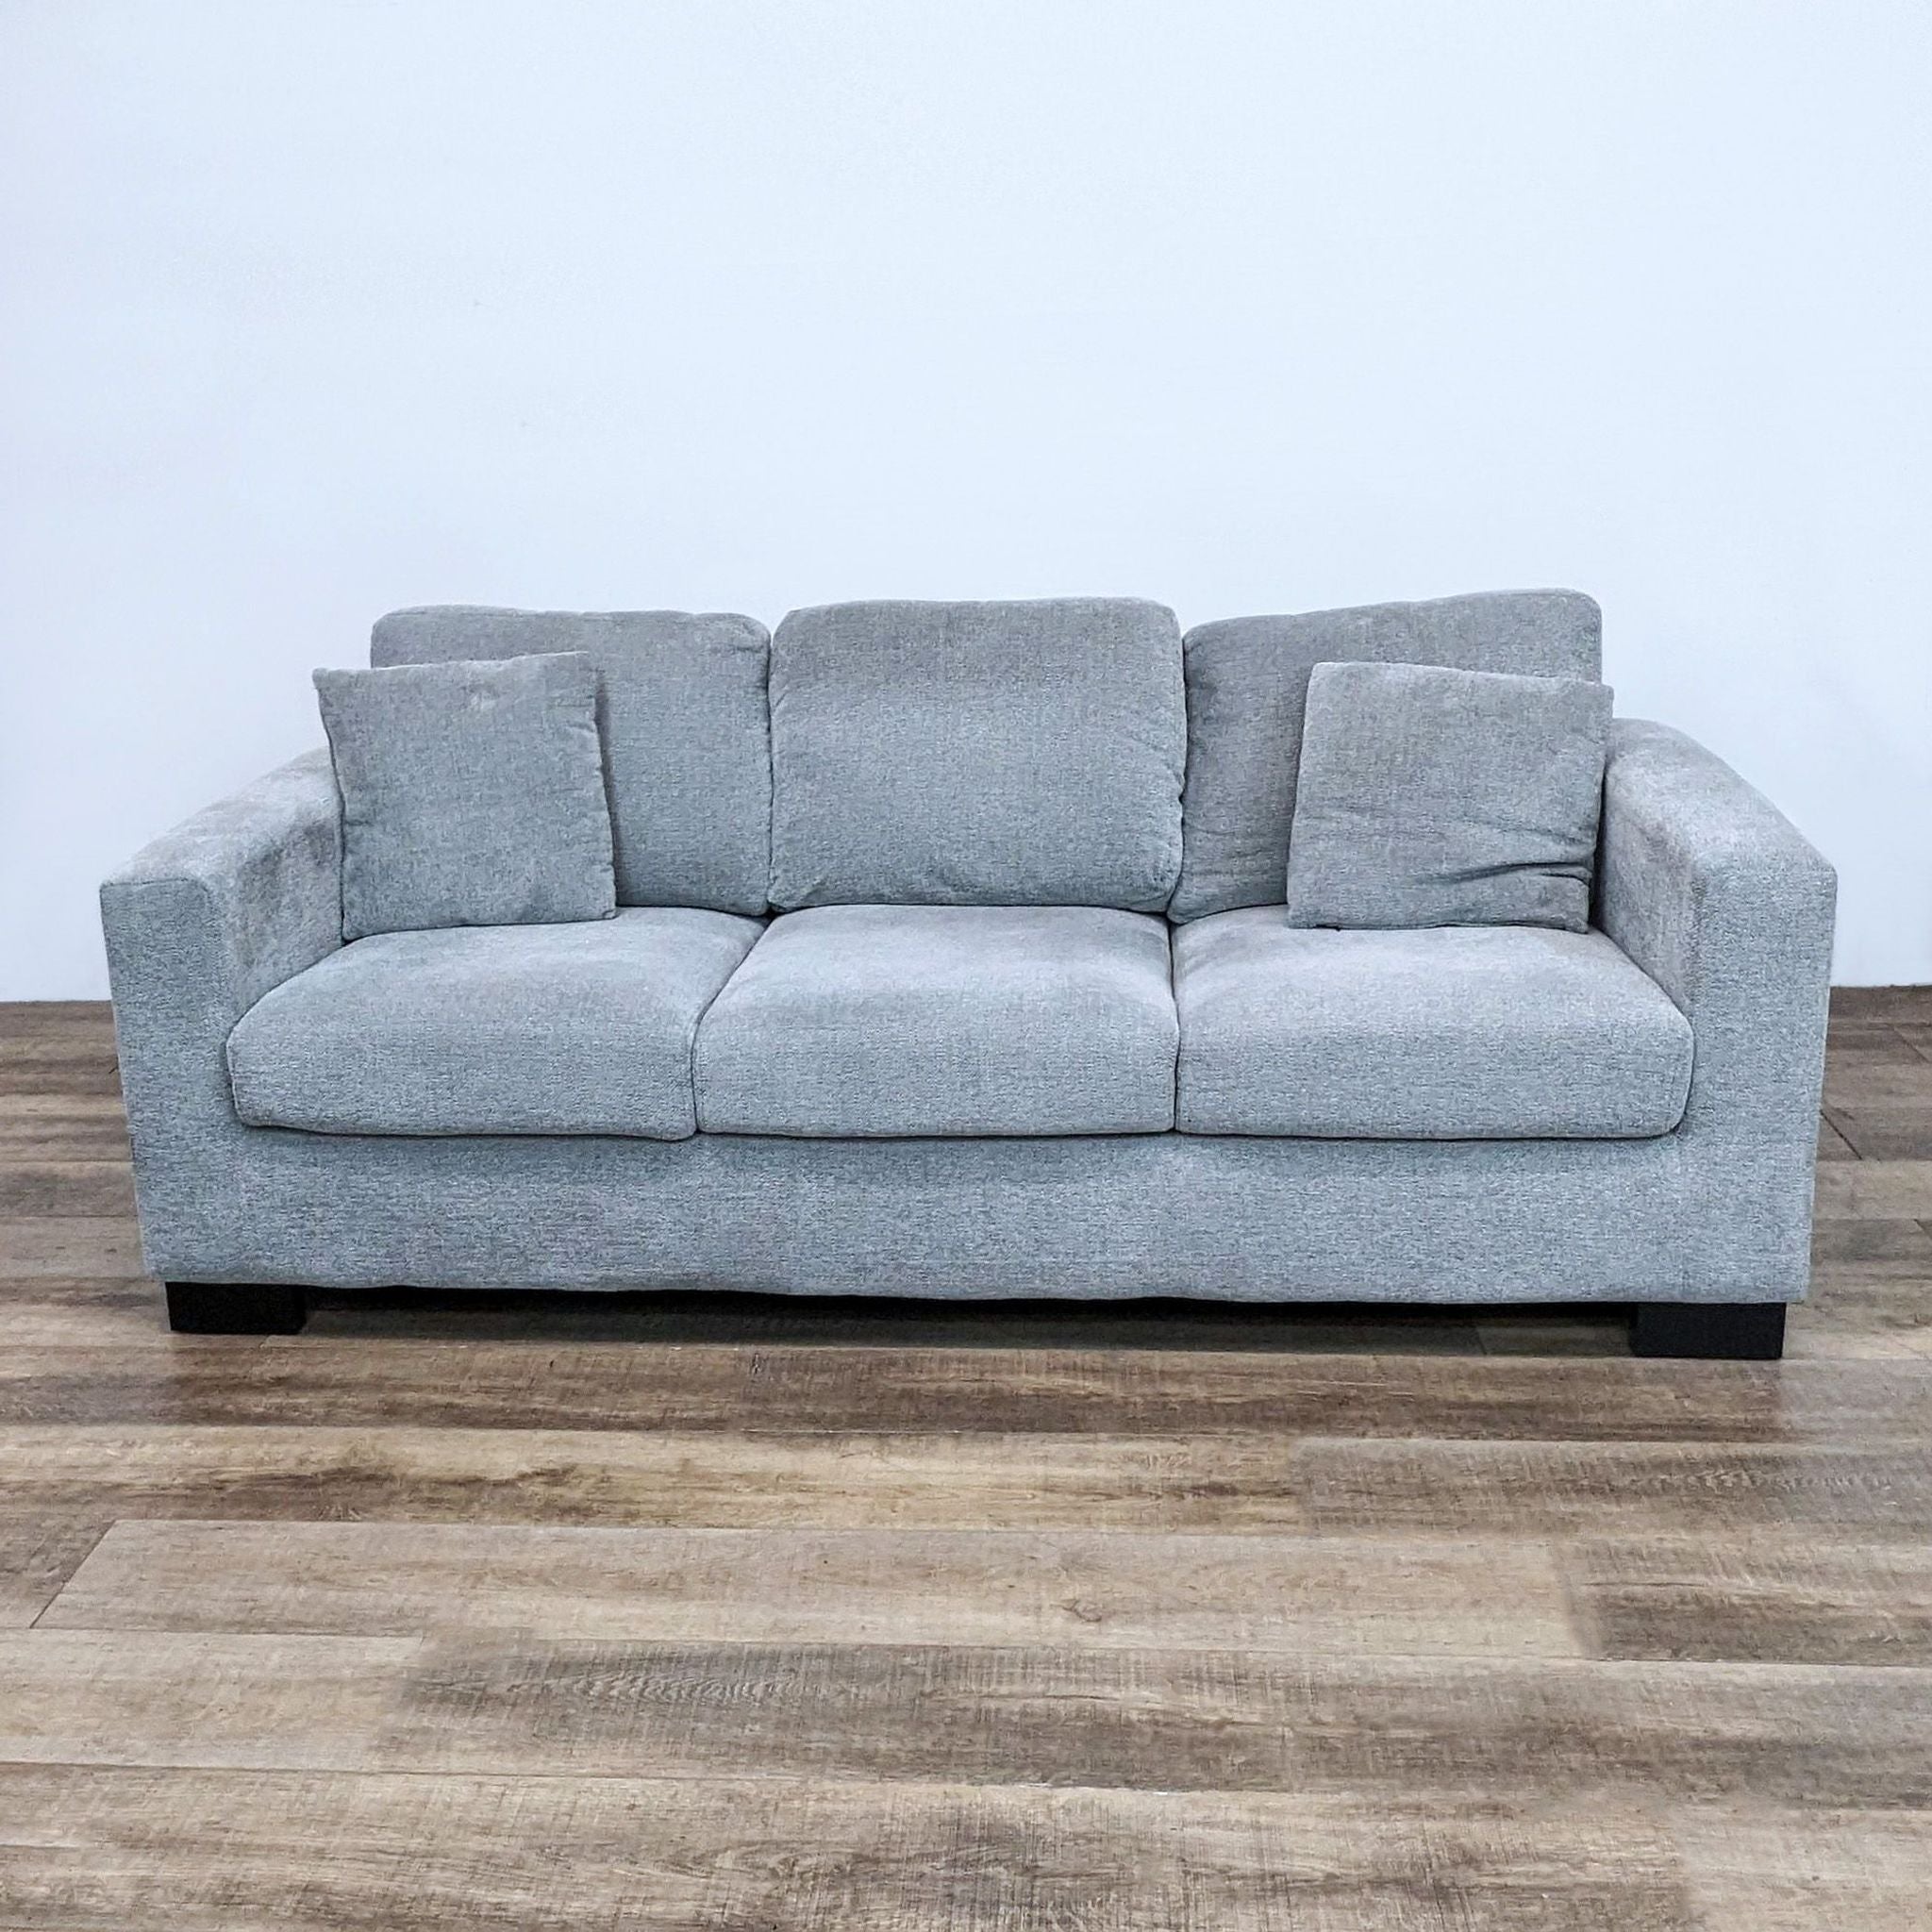 Reperch brand 3-seat compact gray fabric sofa with plush cushions and square arms on a wooden floor.